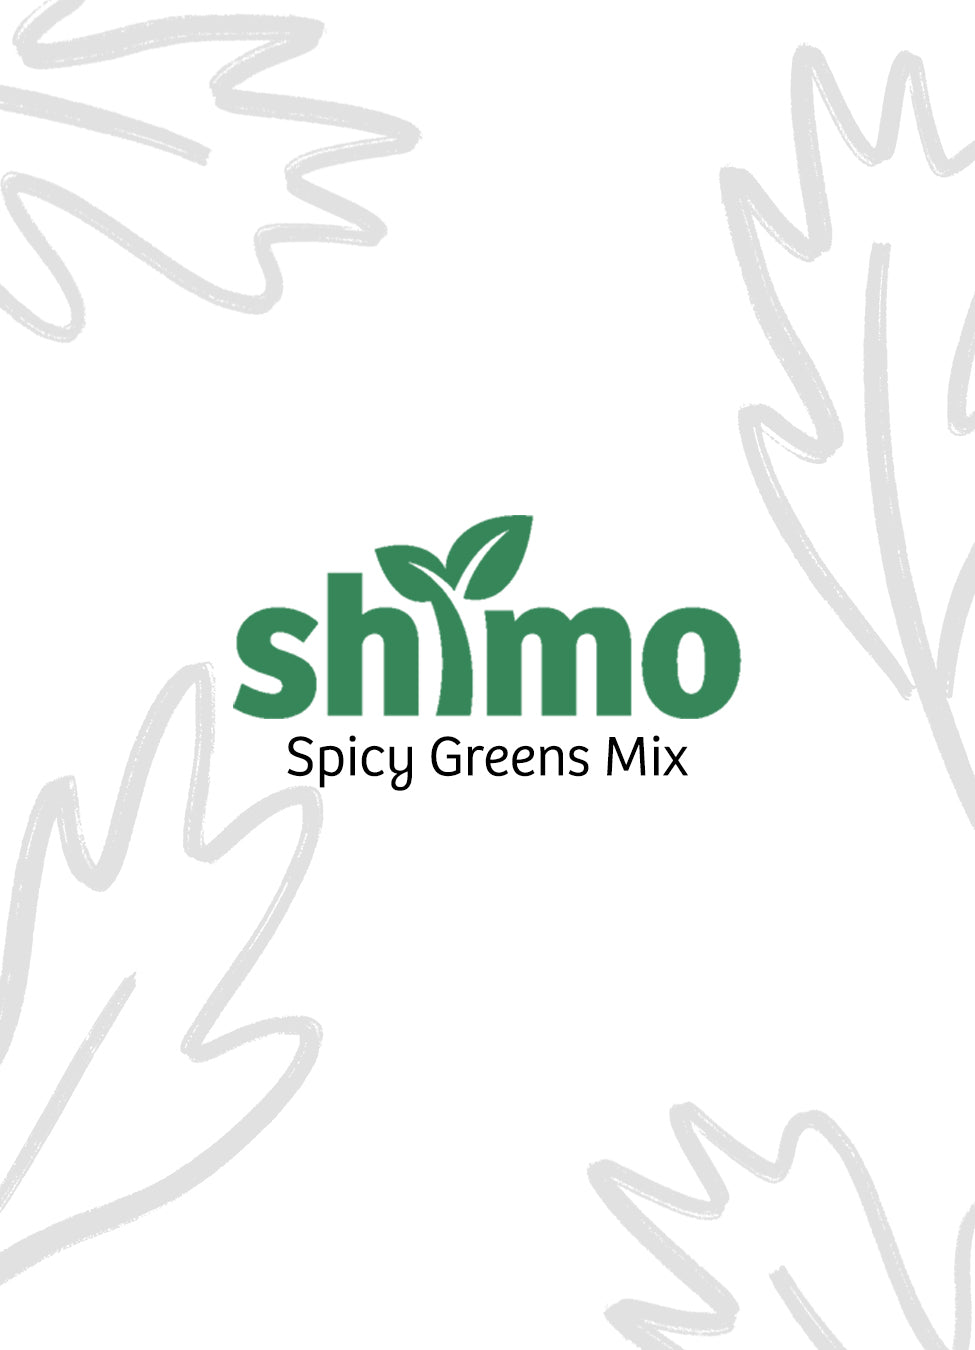 Shimo Spicy Greens Seed Packet